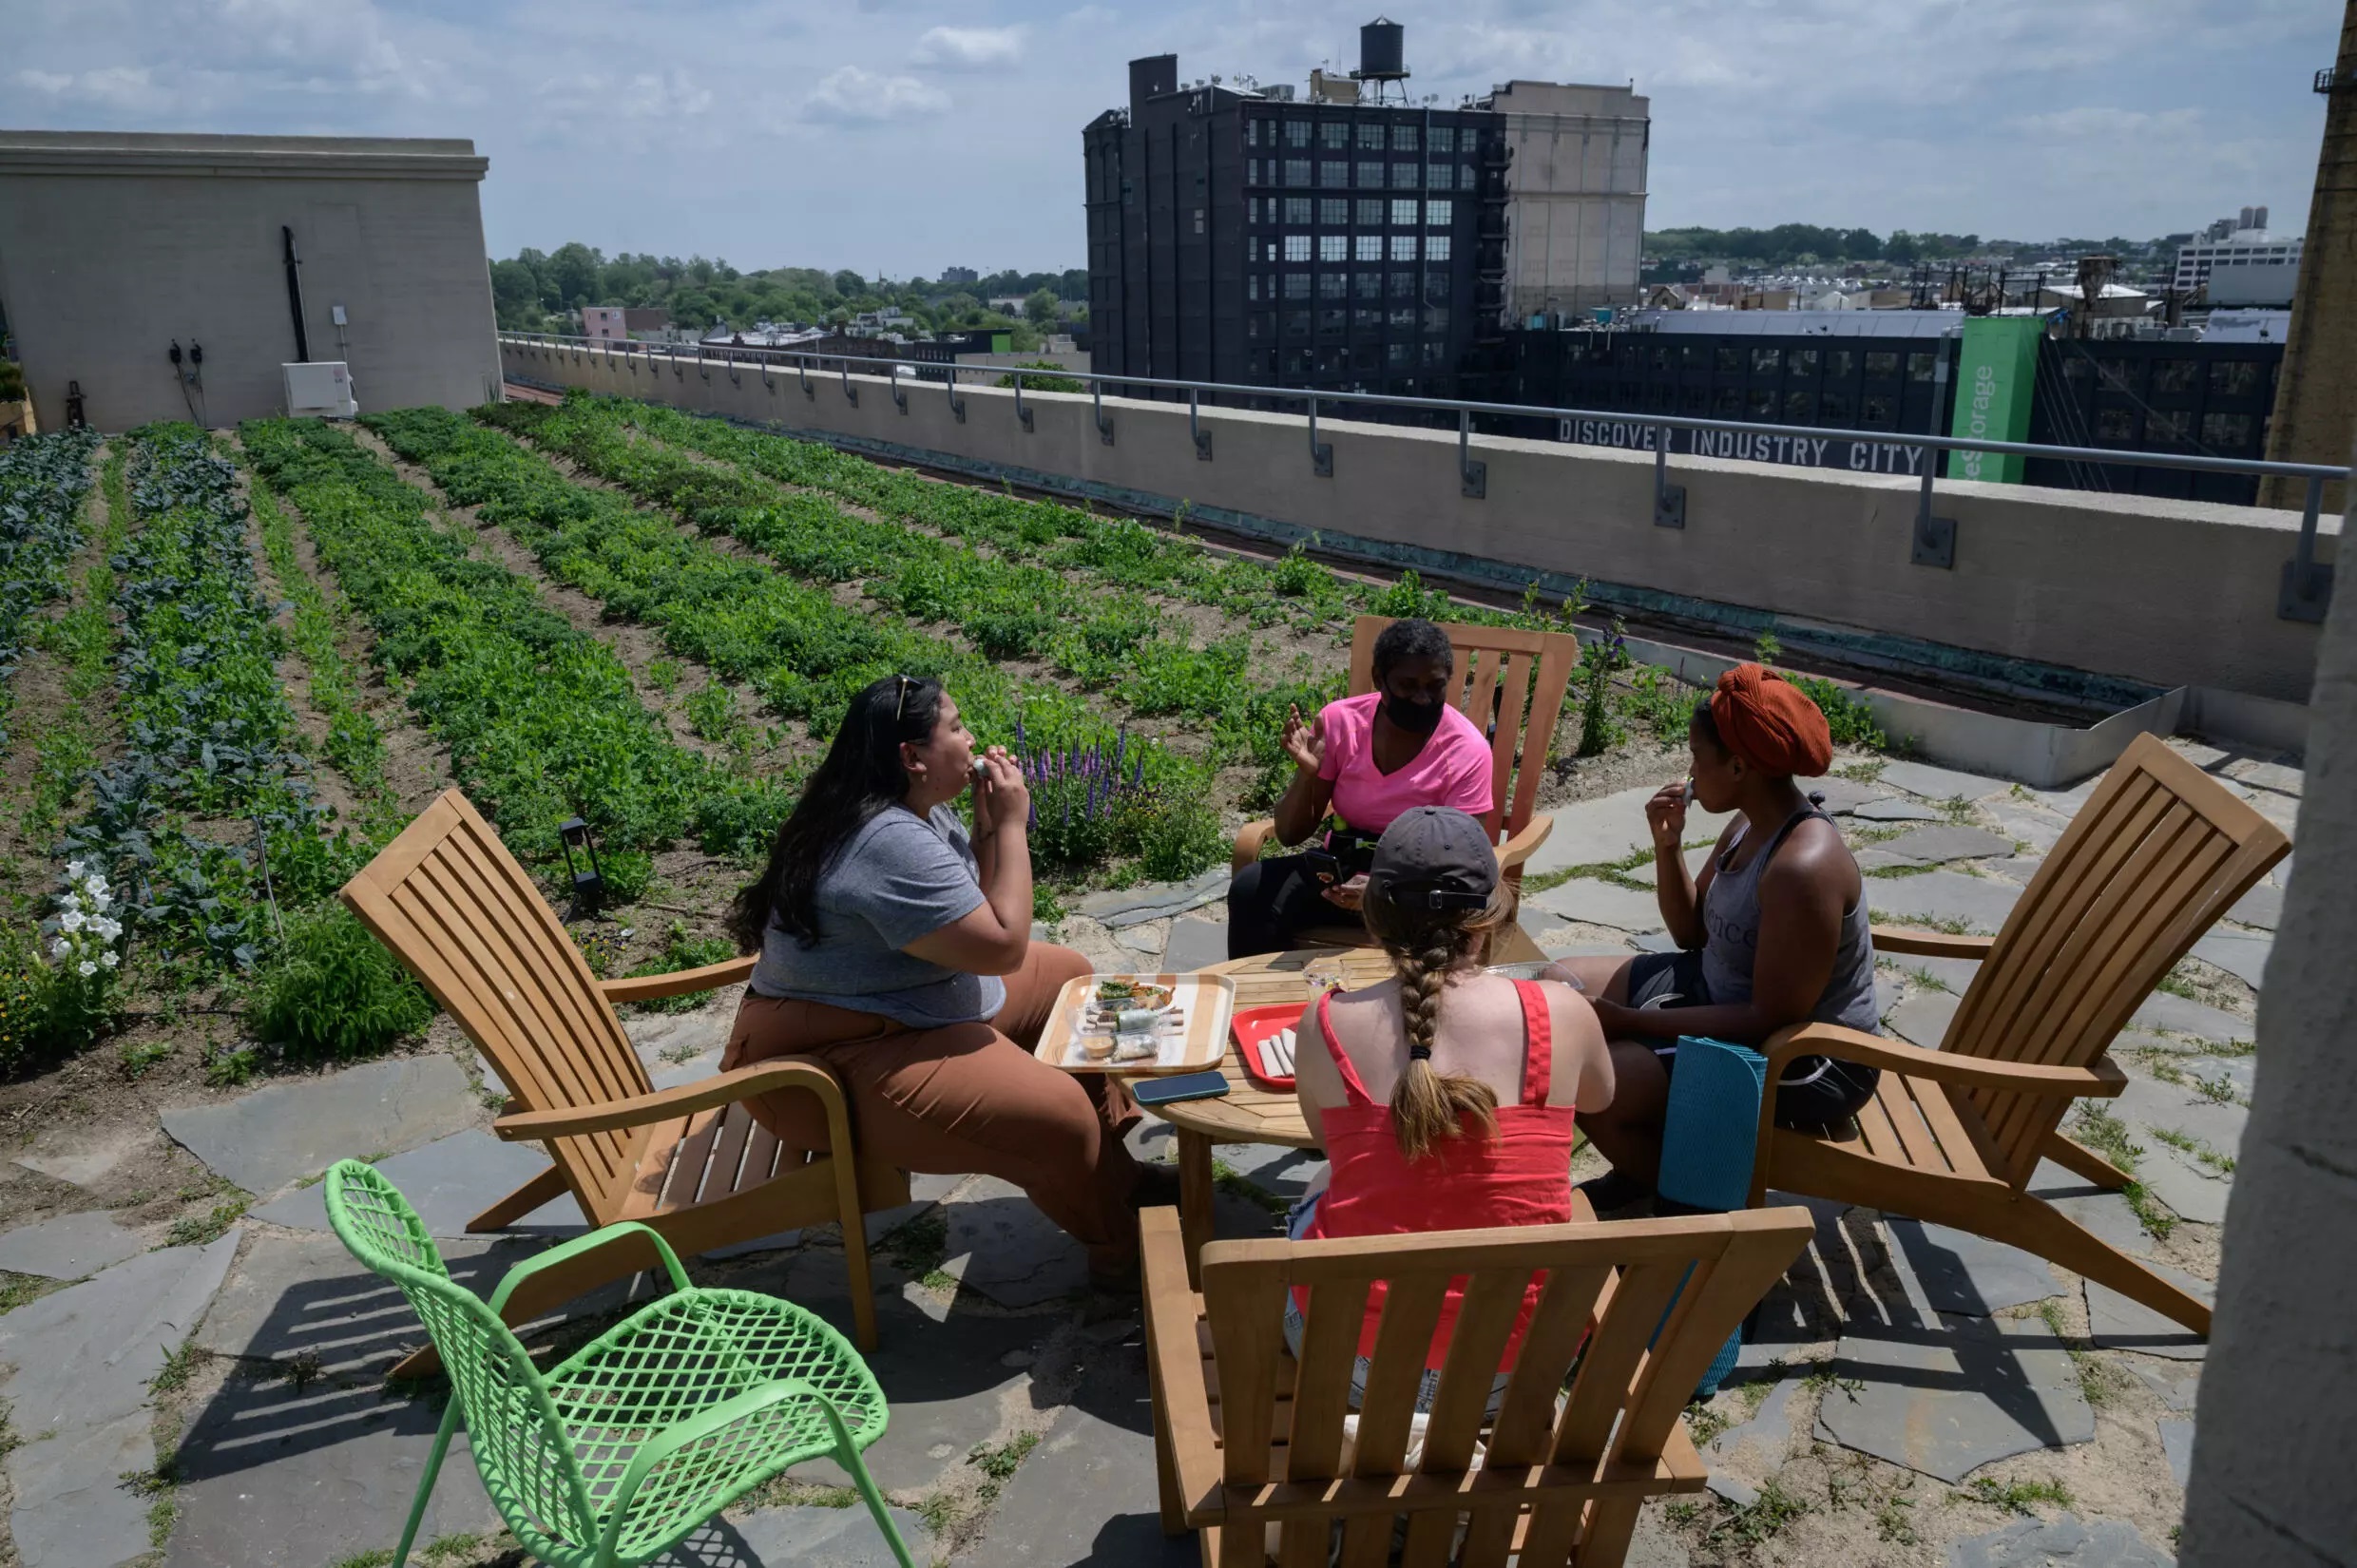 Plants on city streets and rooftops can help cool cities in heatwaves and absorb: Photo: AFP